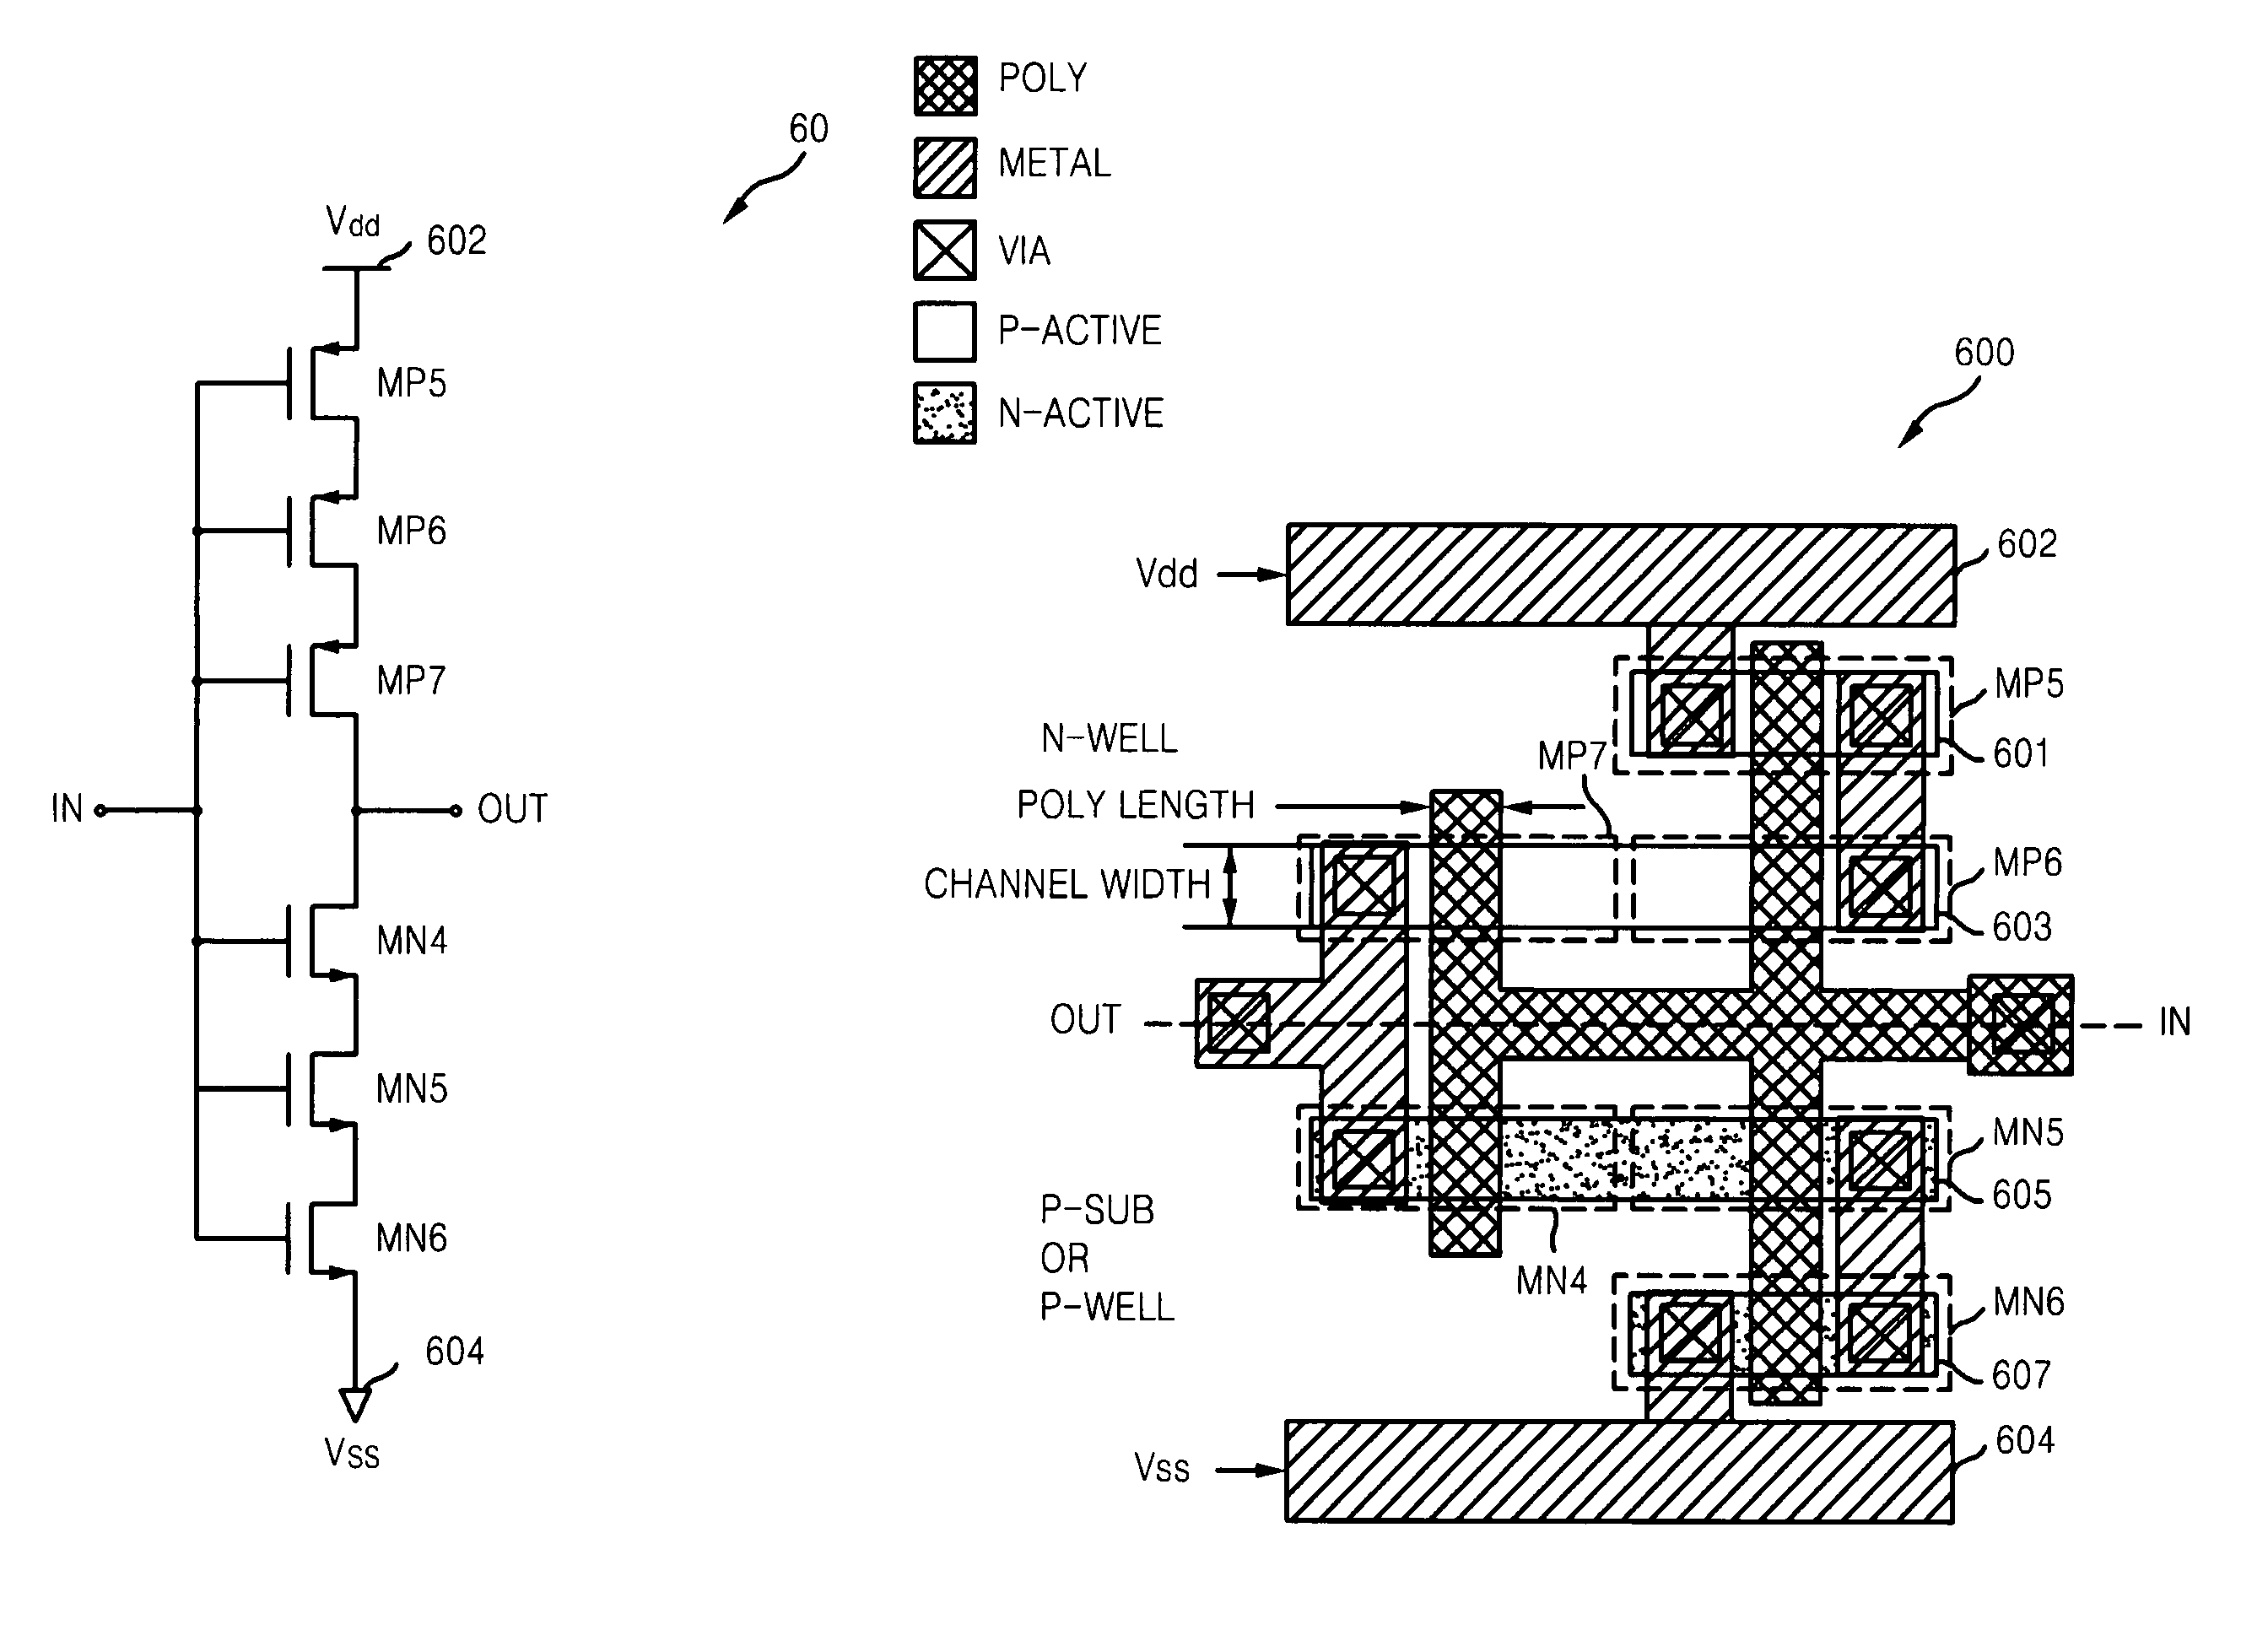 CMOS inverter layout for increasing effective channel length